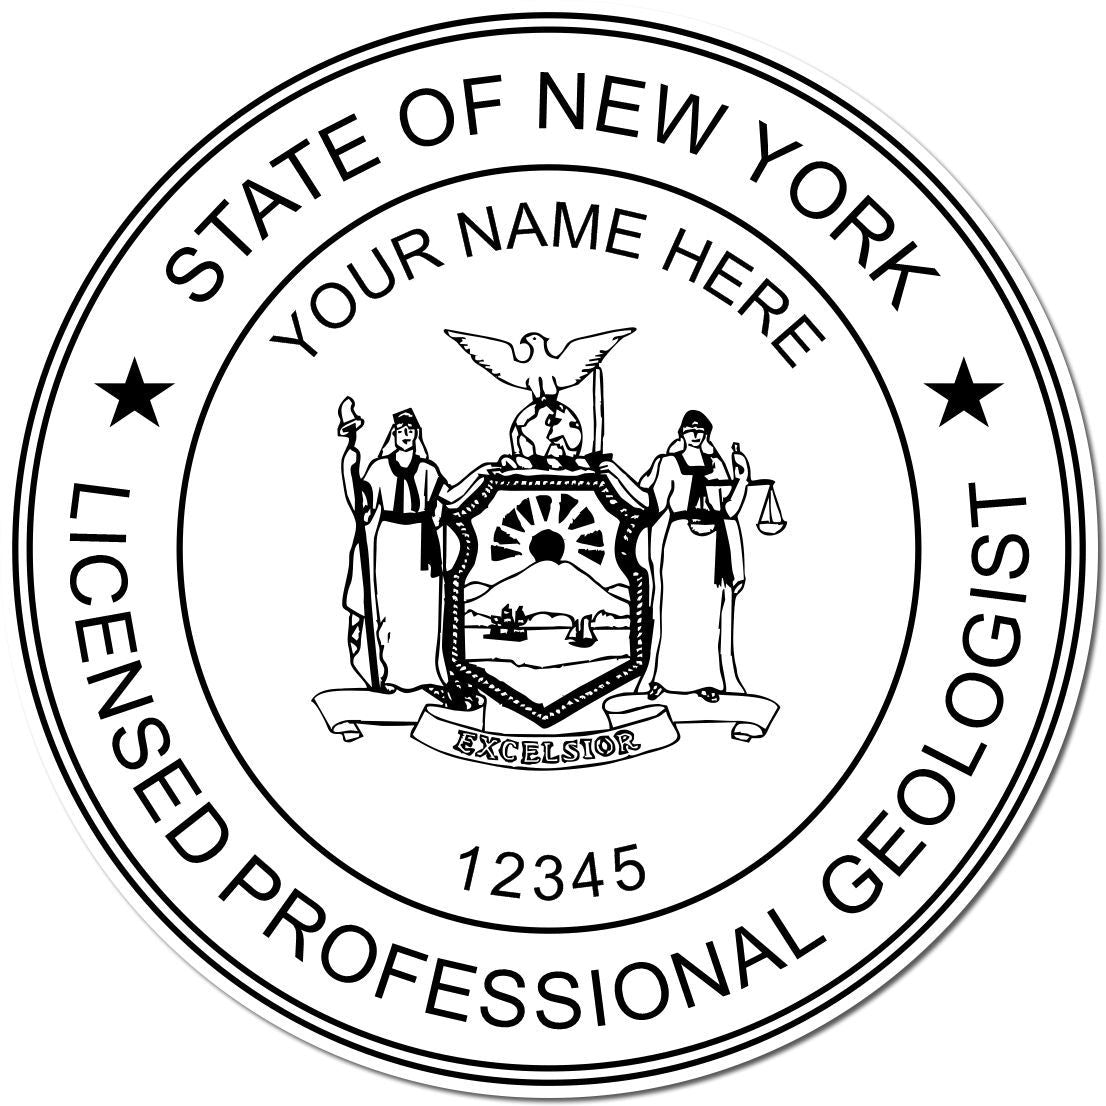 This paper is stamped with a sample imprint of the New York Professional Geologist Seal Stamp, signifying its quality and reliability.